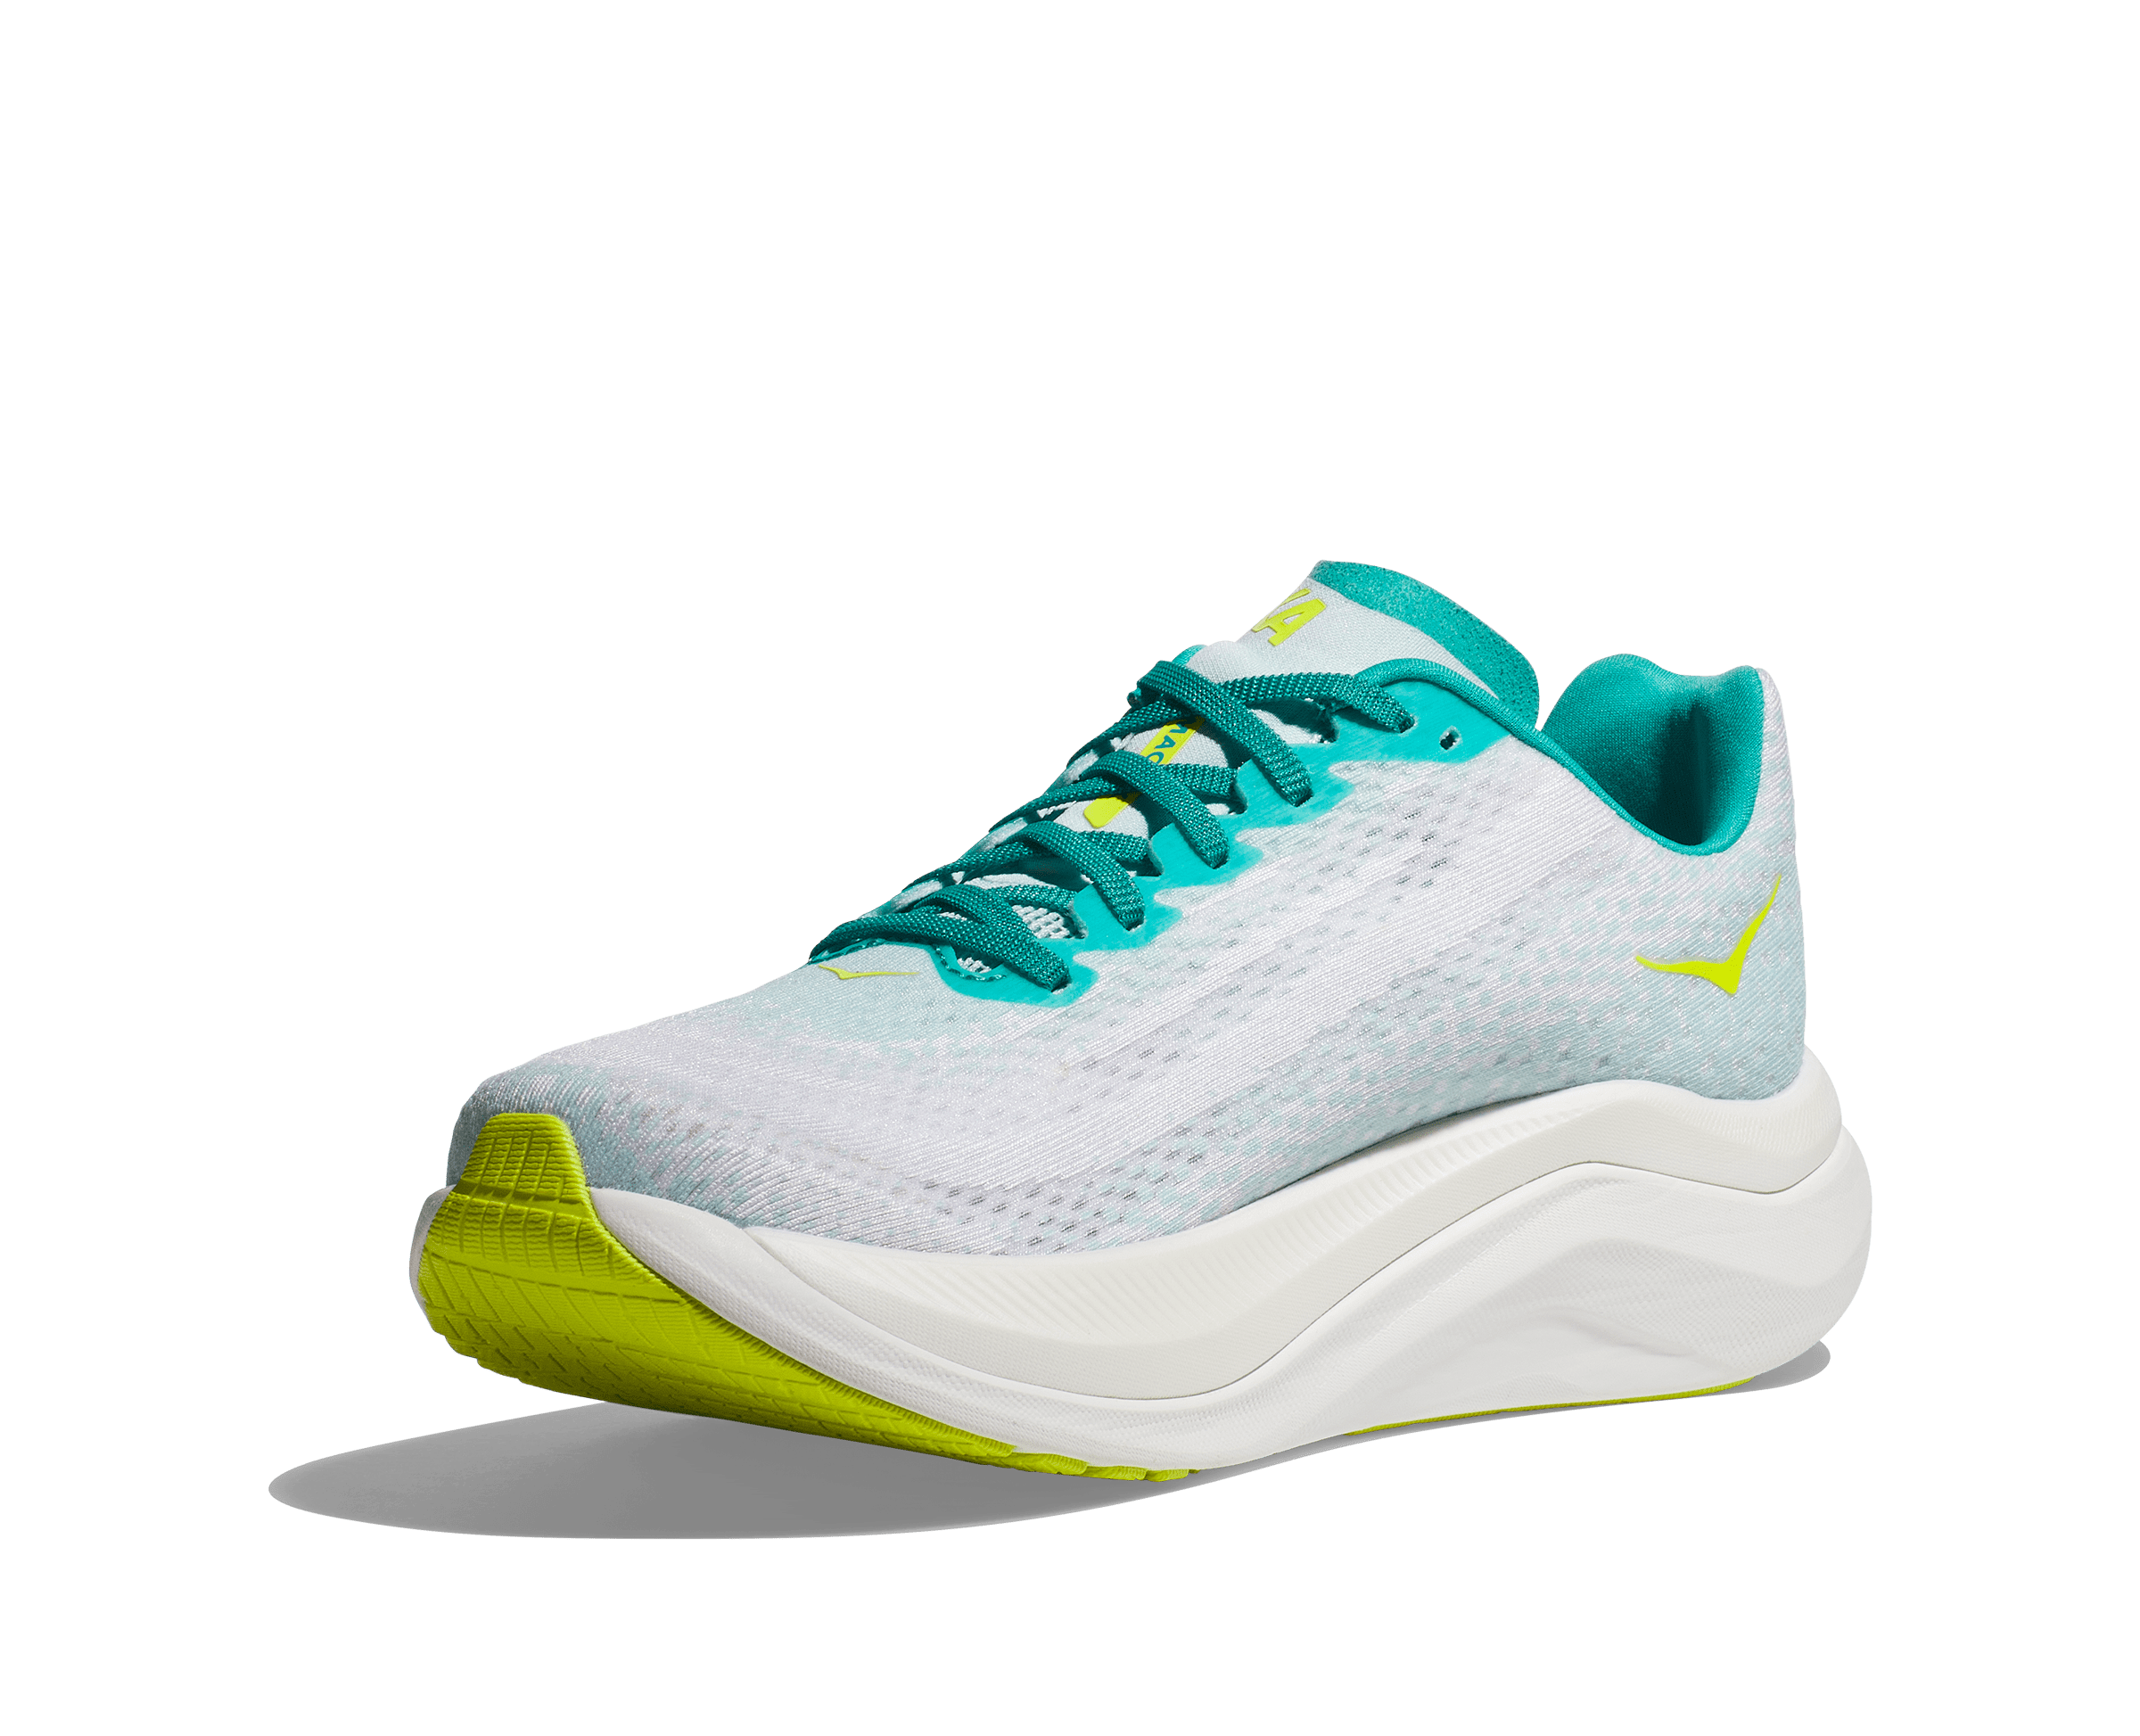 Medial view of the Men's Mach X from HOKA in the color White/Blue Glass